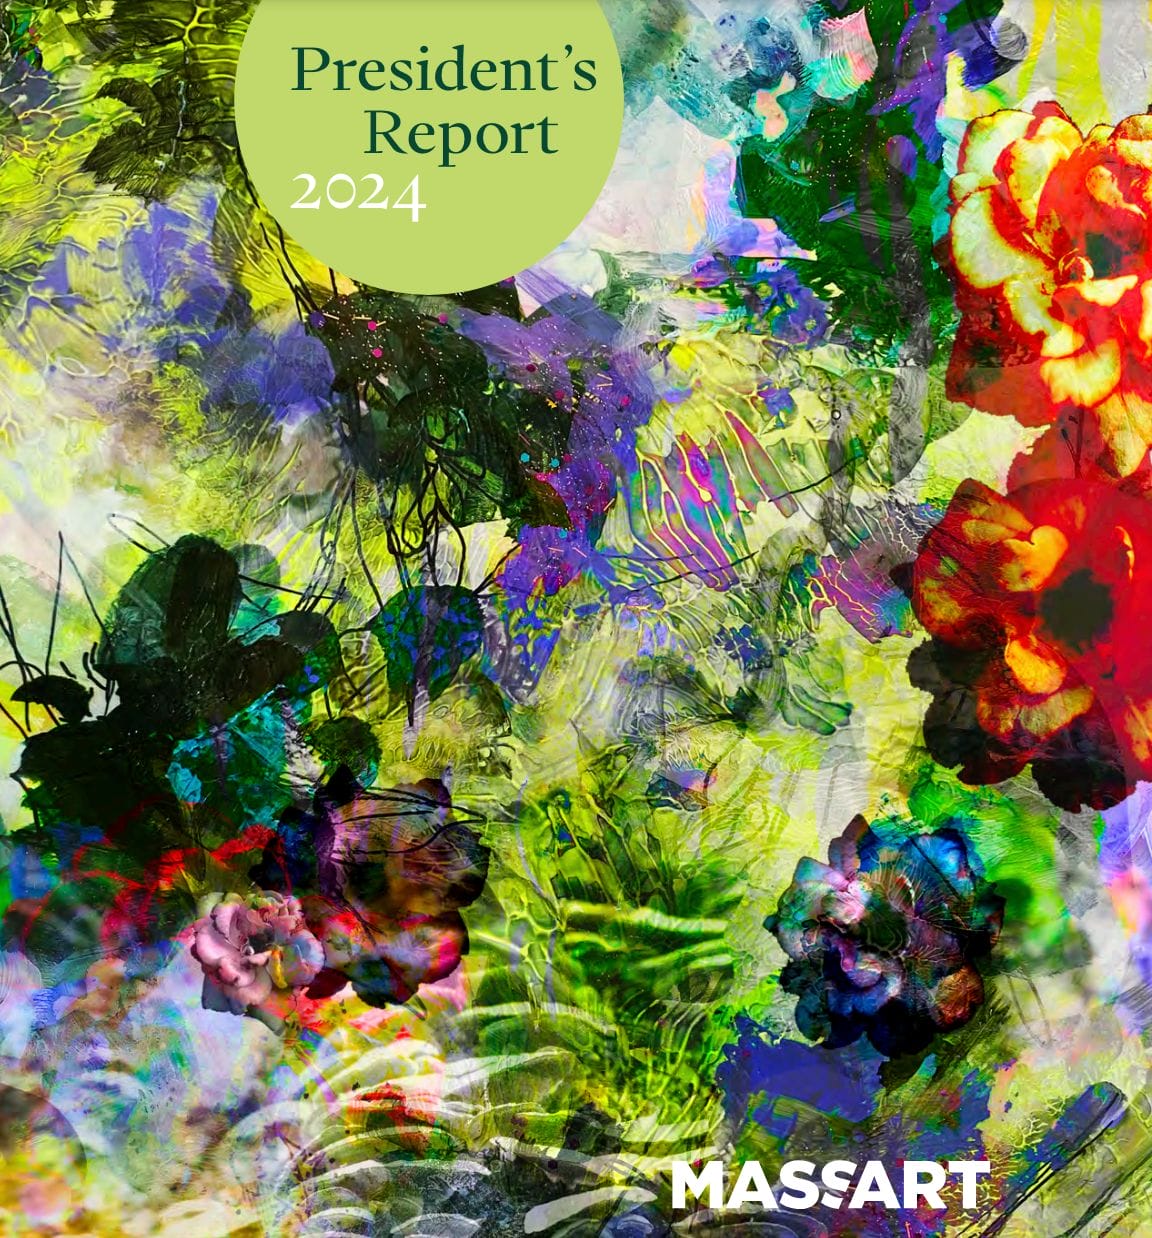 The cover of the MassArt President's Report 2024, with a floral painting featured on the cover.